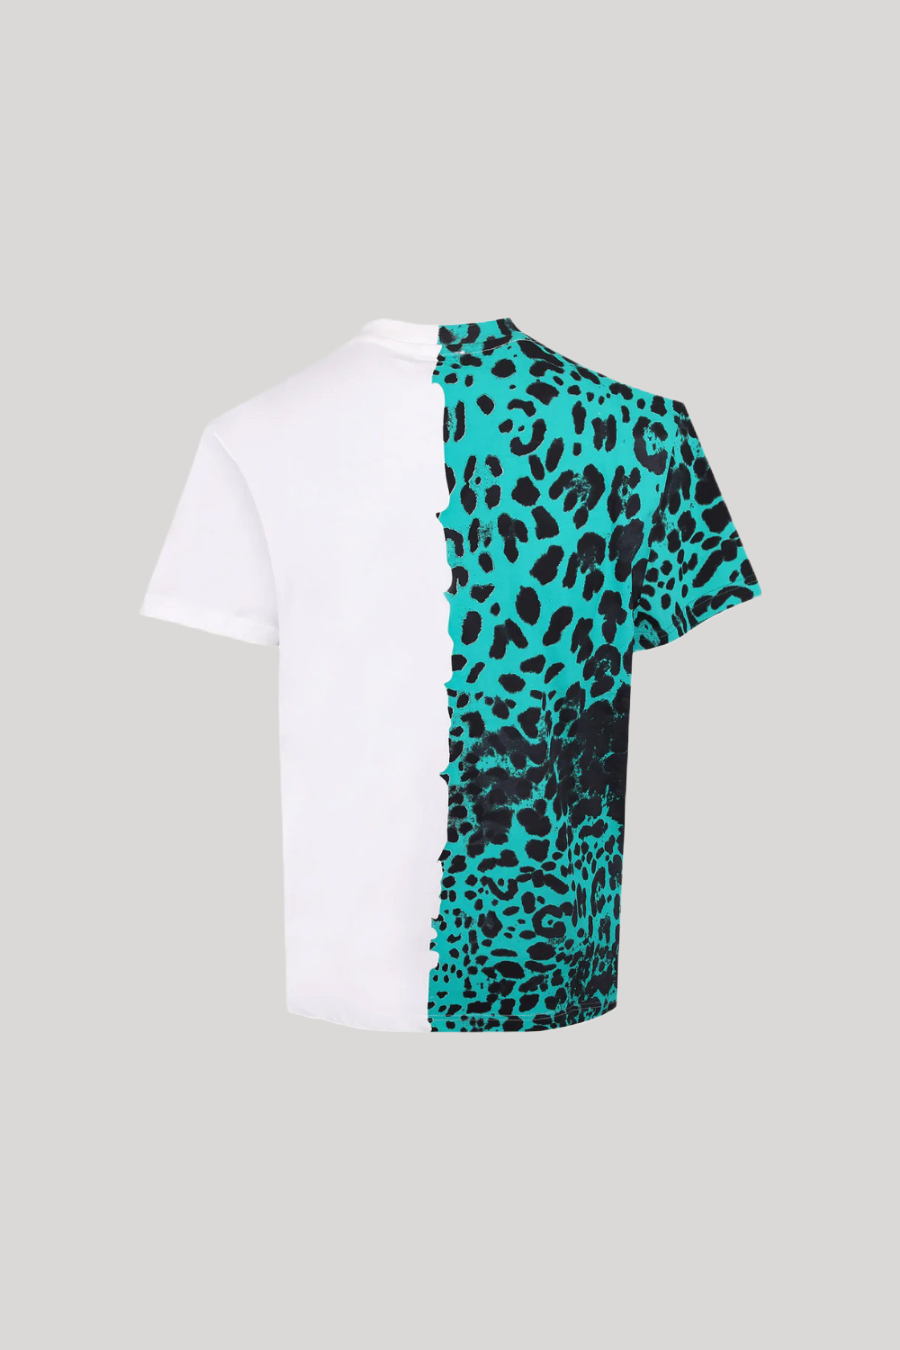 DOLCE & GABBANA JERSEY WHITE T-SHIRT WITH TIGER PRINT